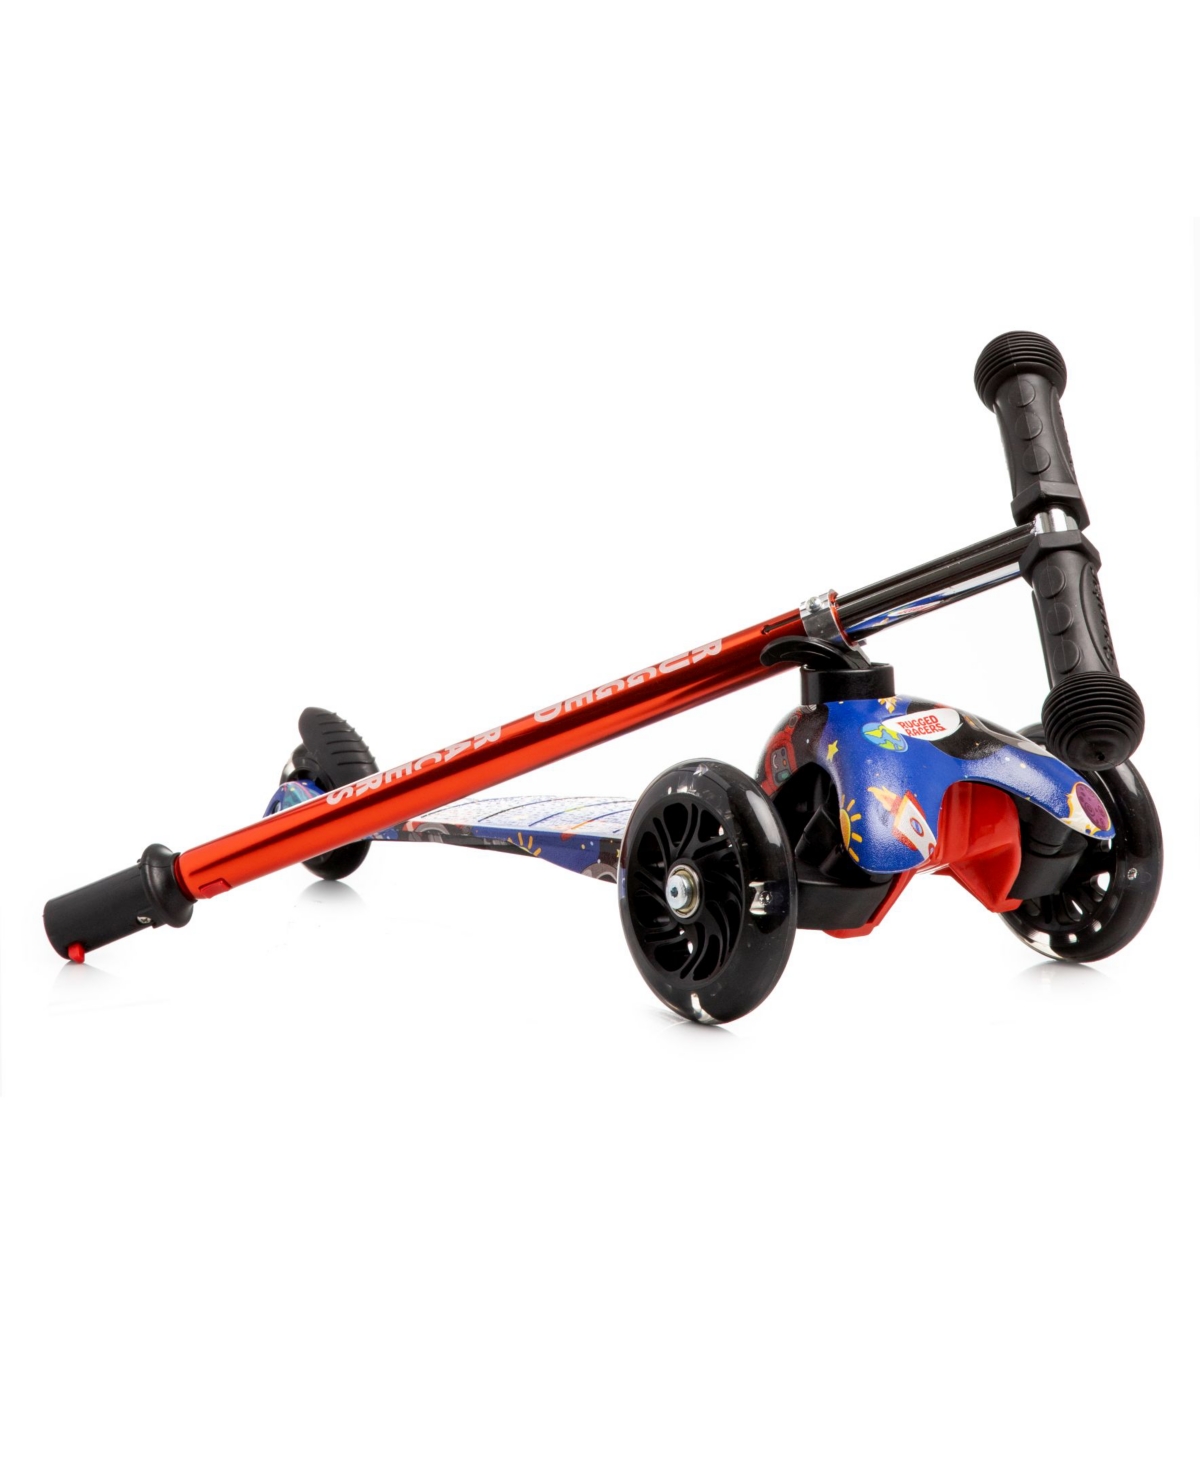 Shop Rugged Racers Kids Scooter With Spaceship Print Design In Multicolor